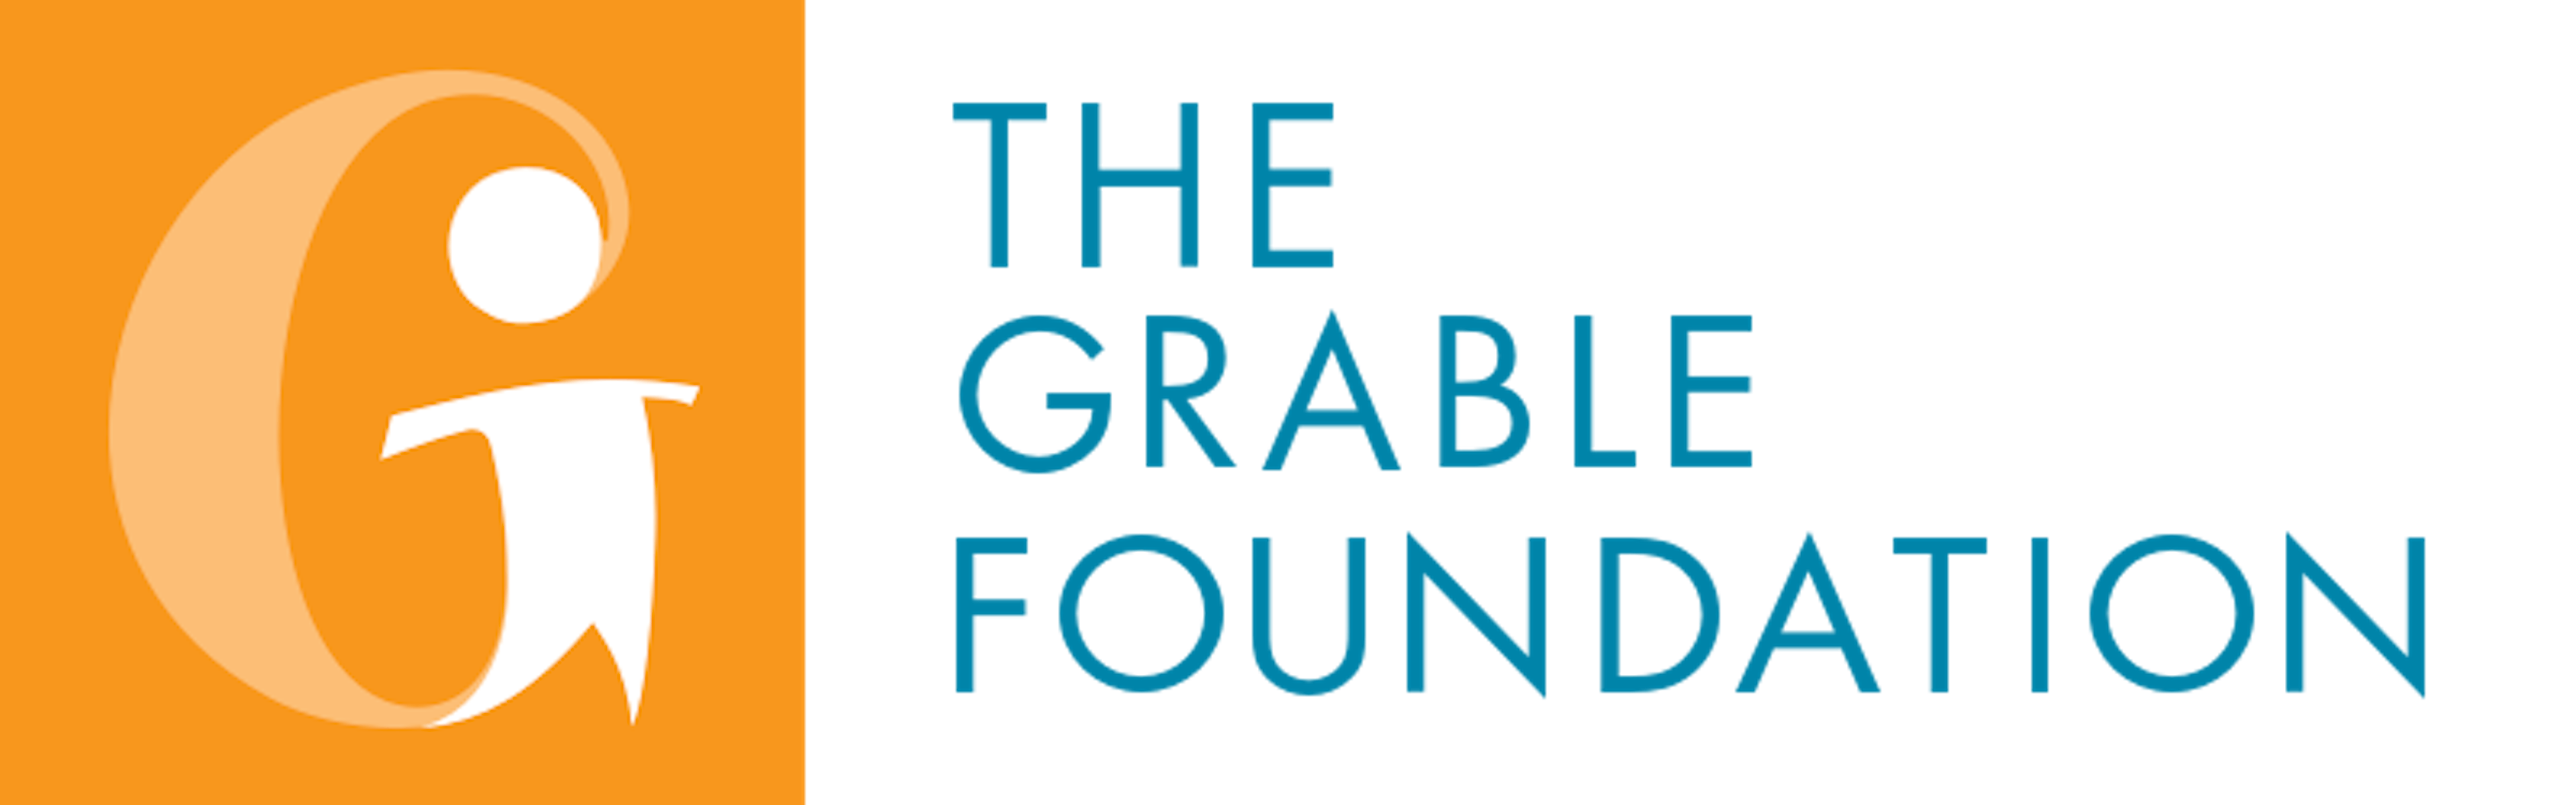 The Grable Foundation